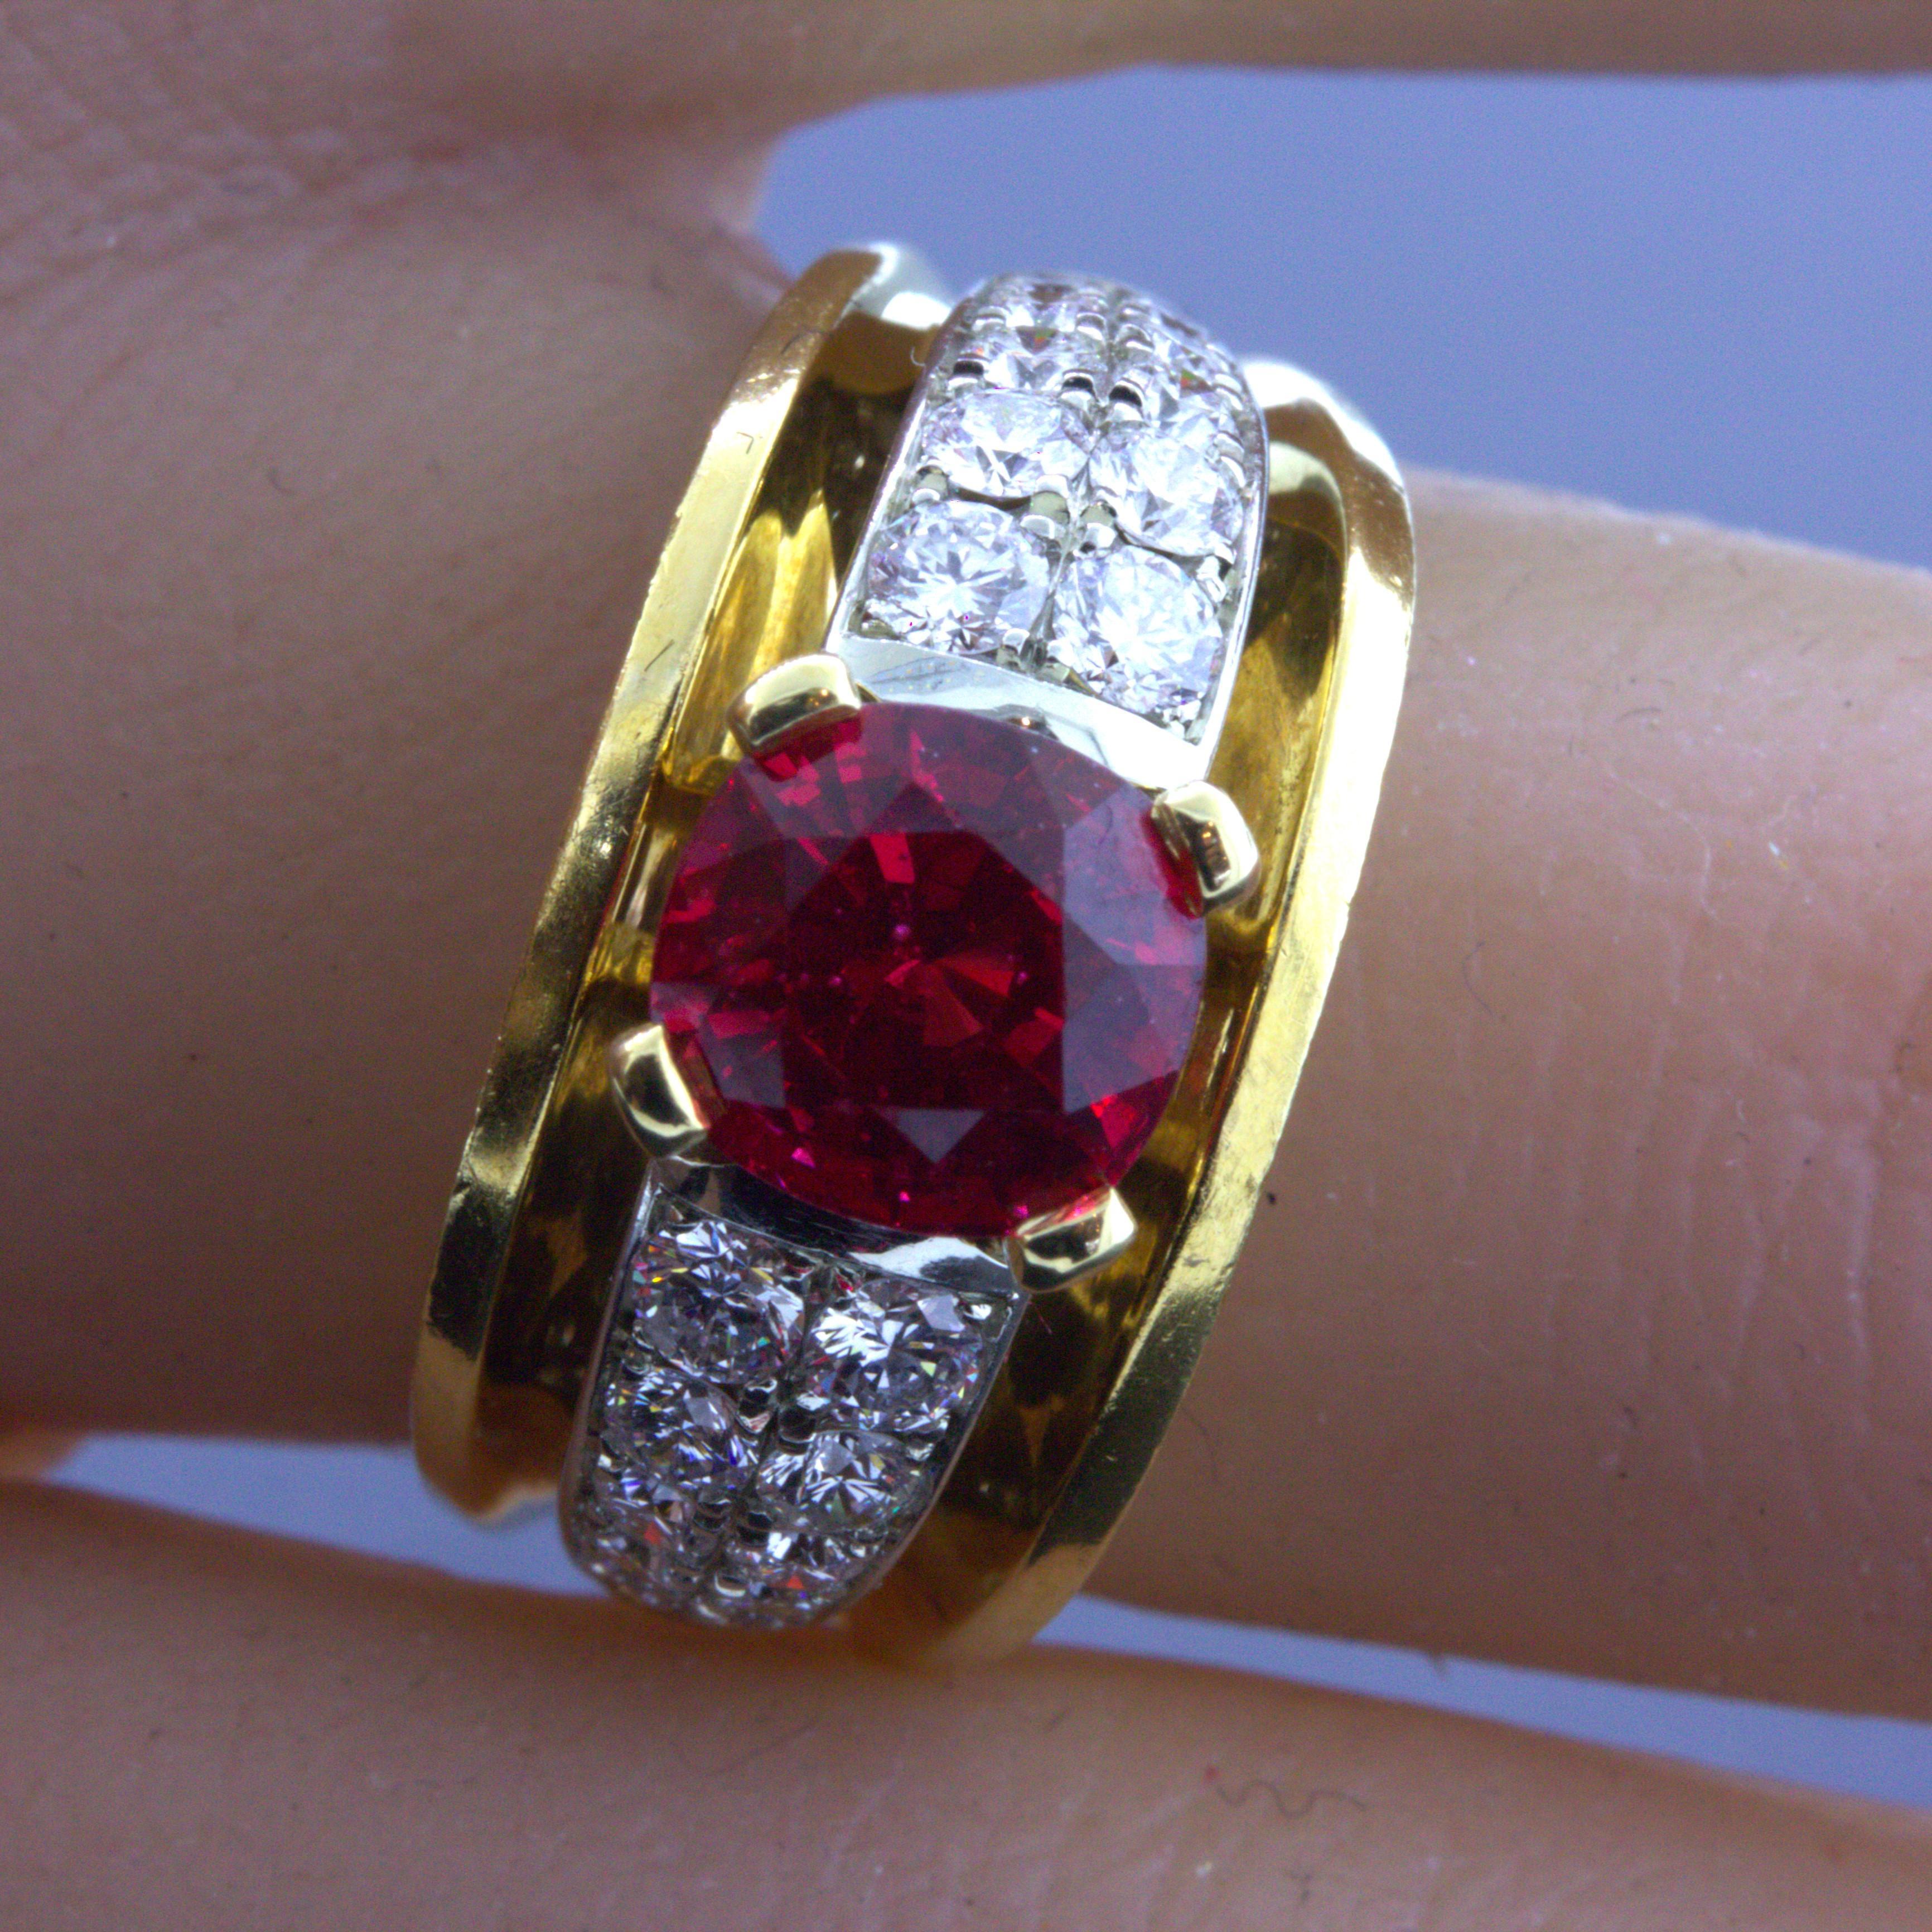 Exceptional 2.28 Carat Burmese Red Spinel Diamond 18K Yellow Gold Ring, GIA Cert For Sale 1